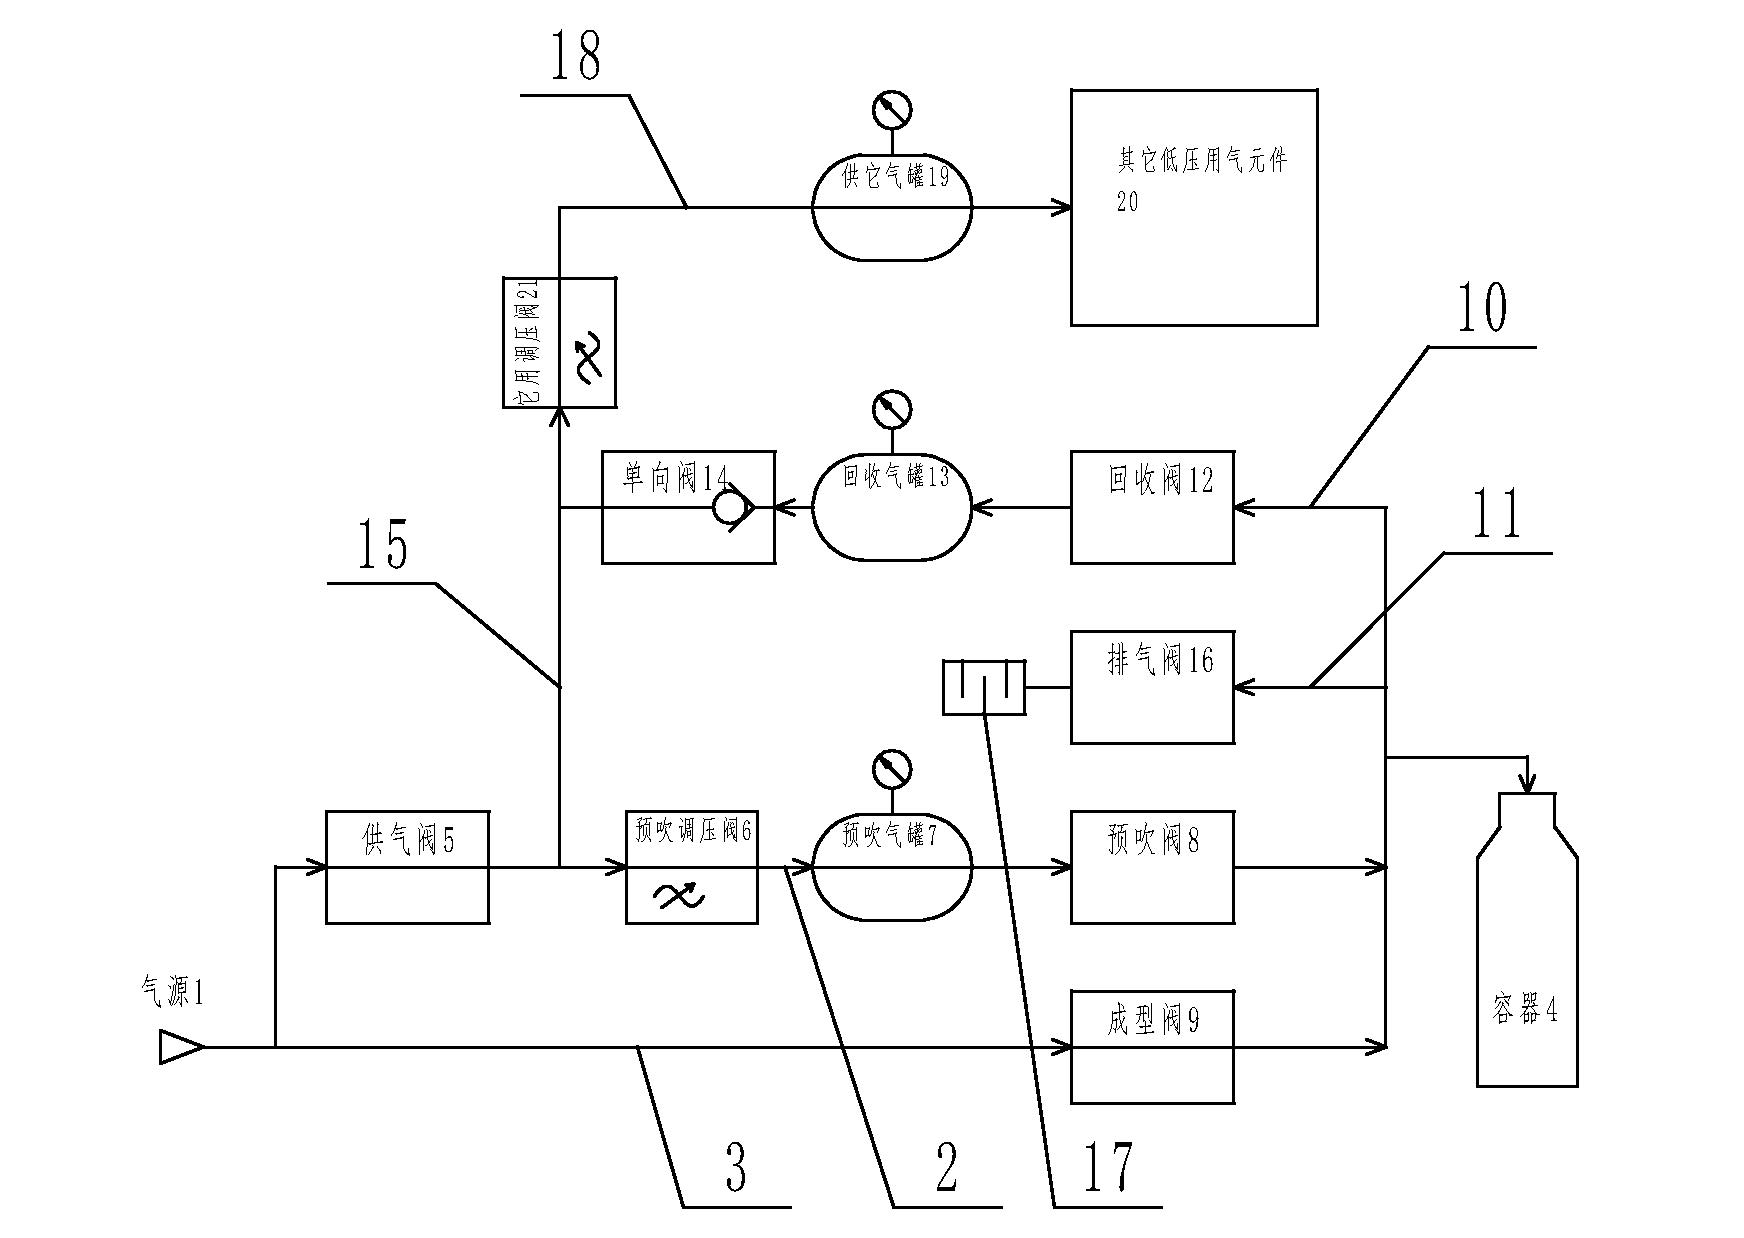 Control system for blow molding air channel